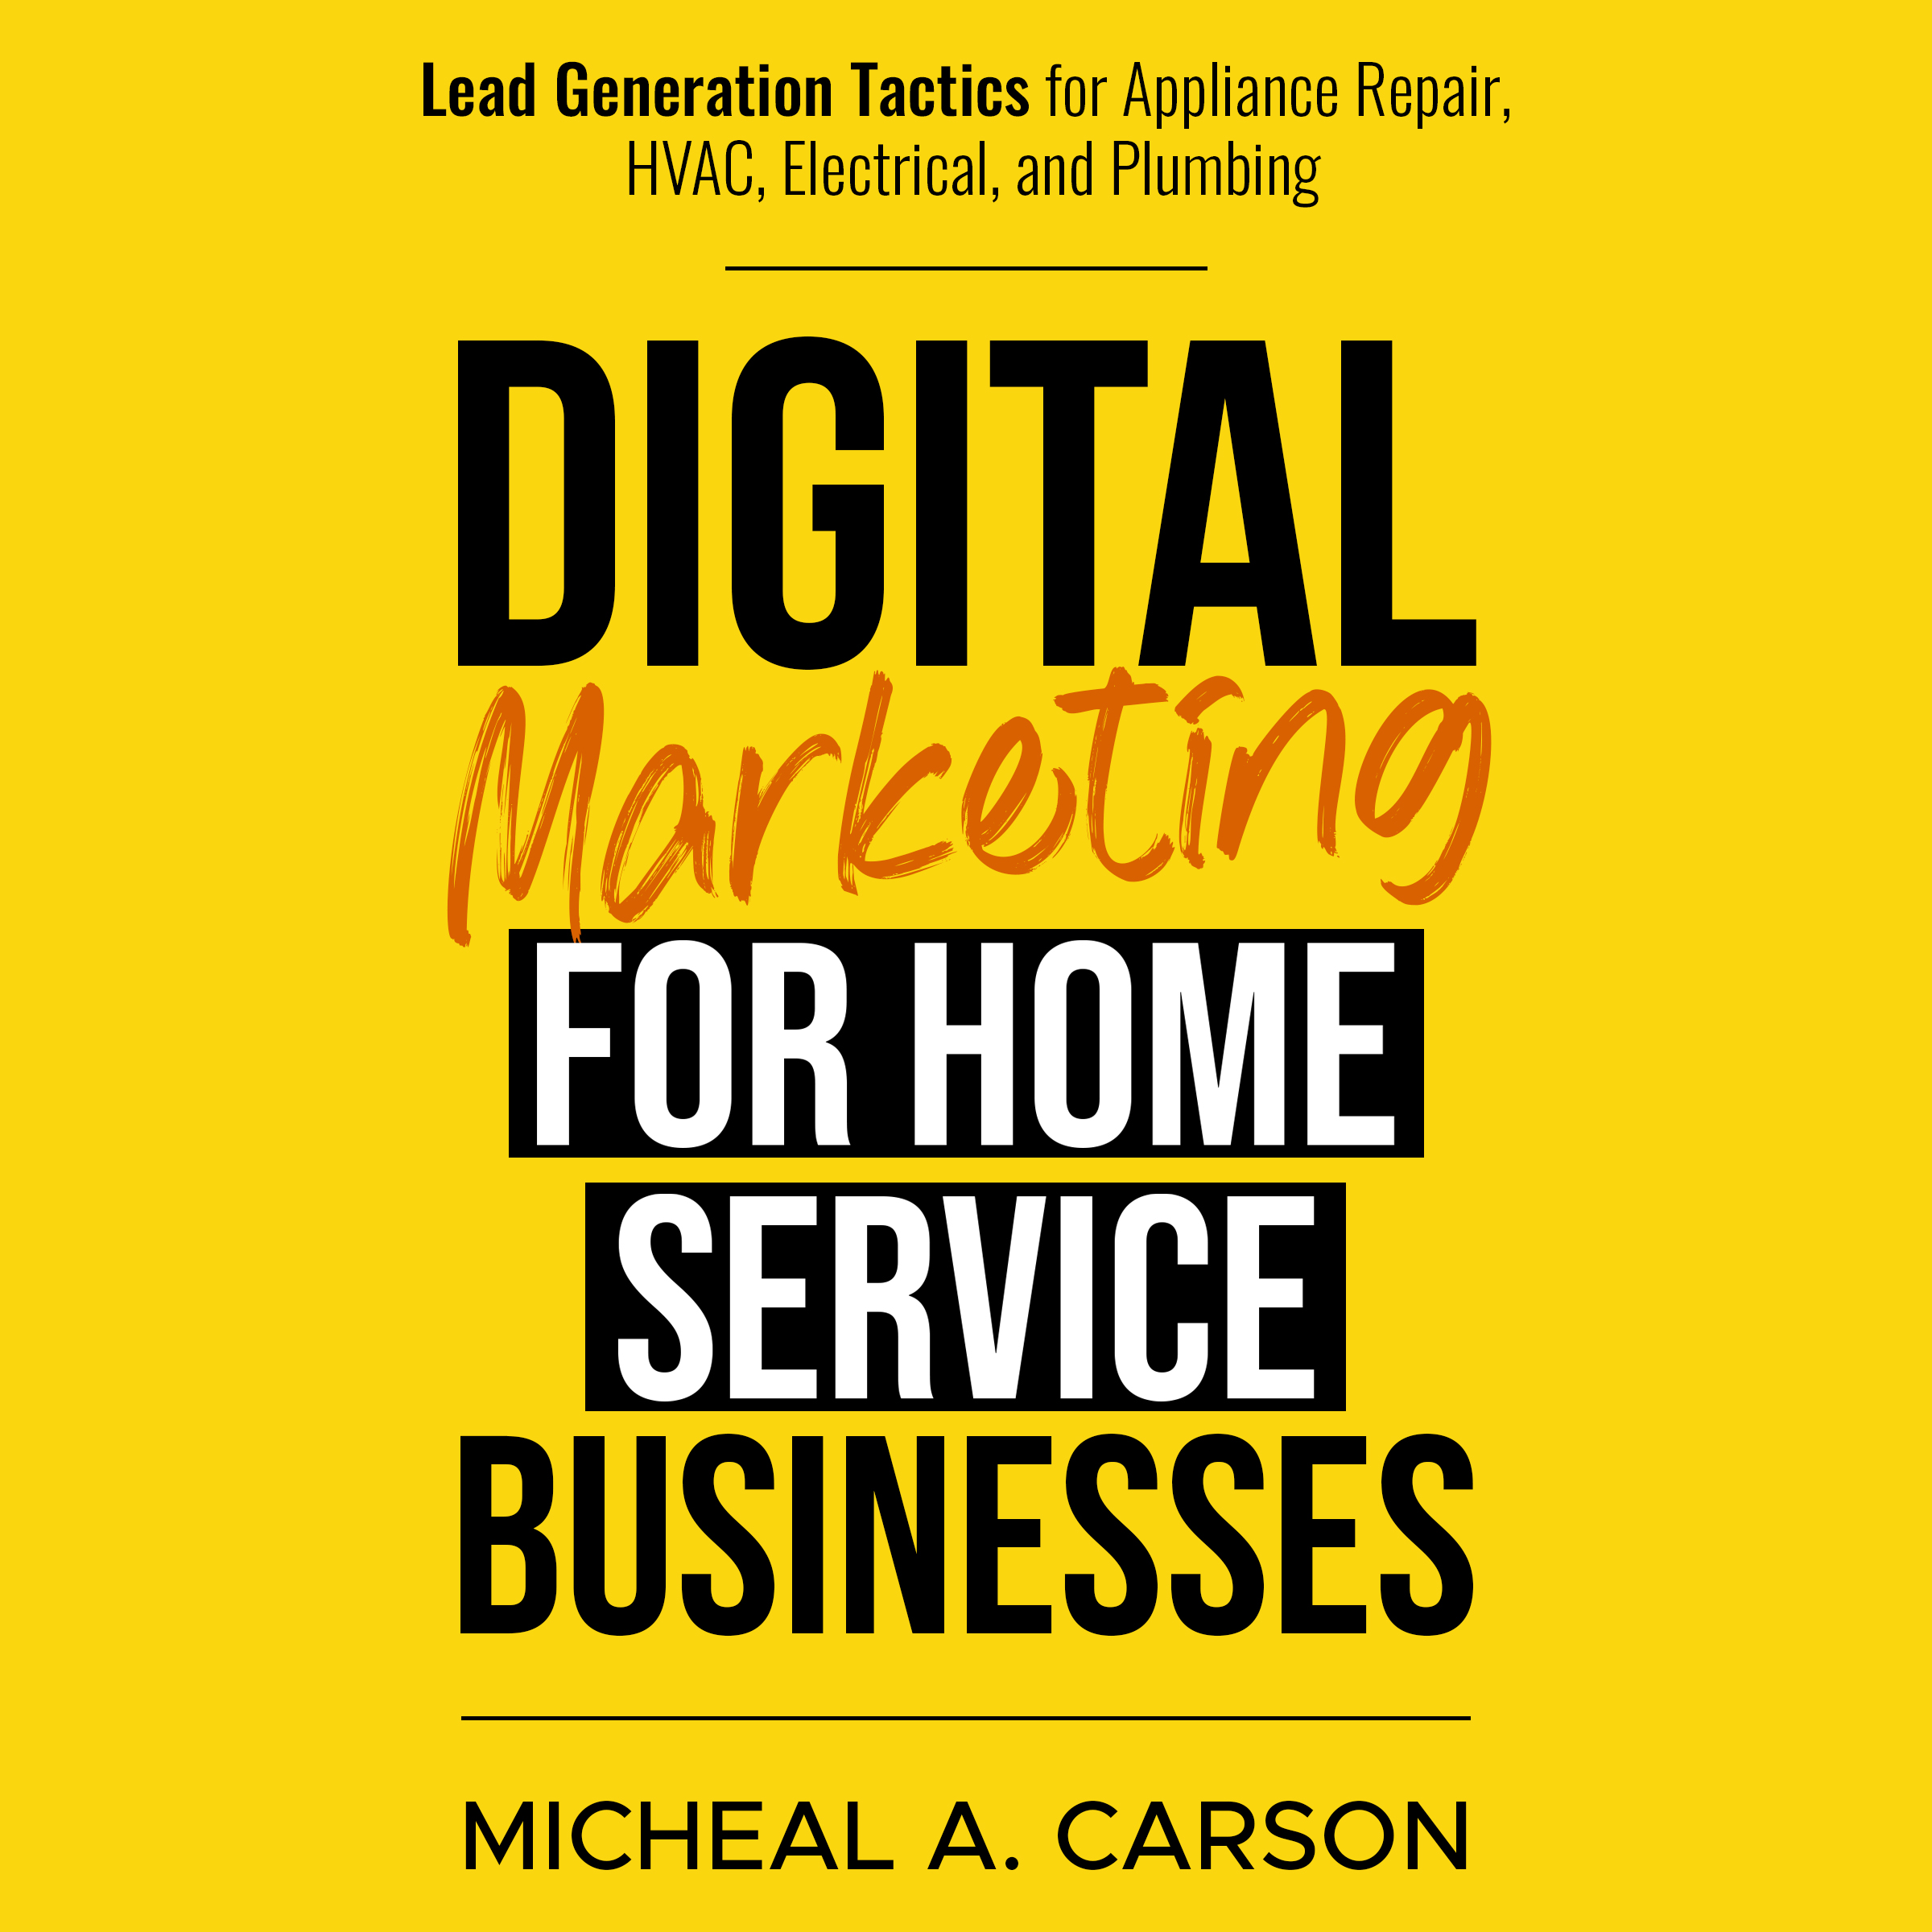 Digital Marketing Expert Mike Carson Releases Groundbreaking New Book for Home Service Businesses